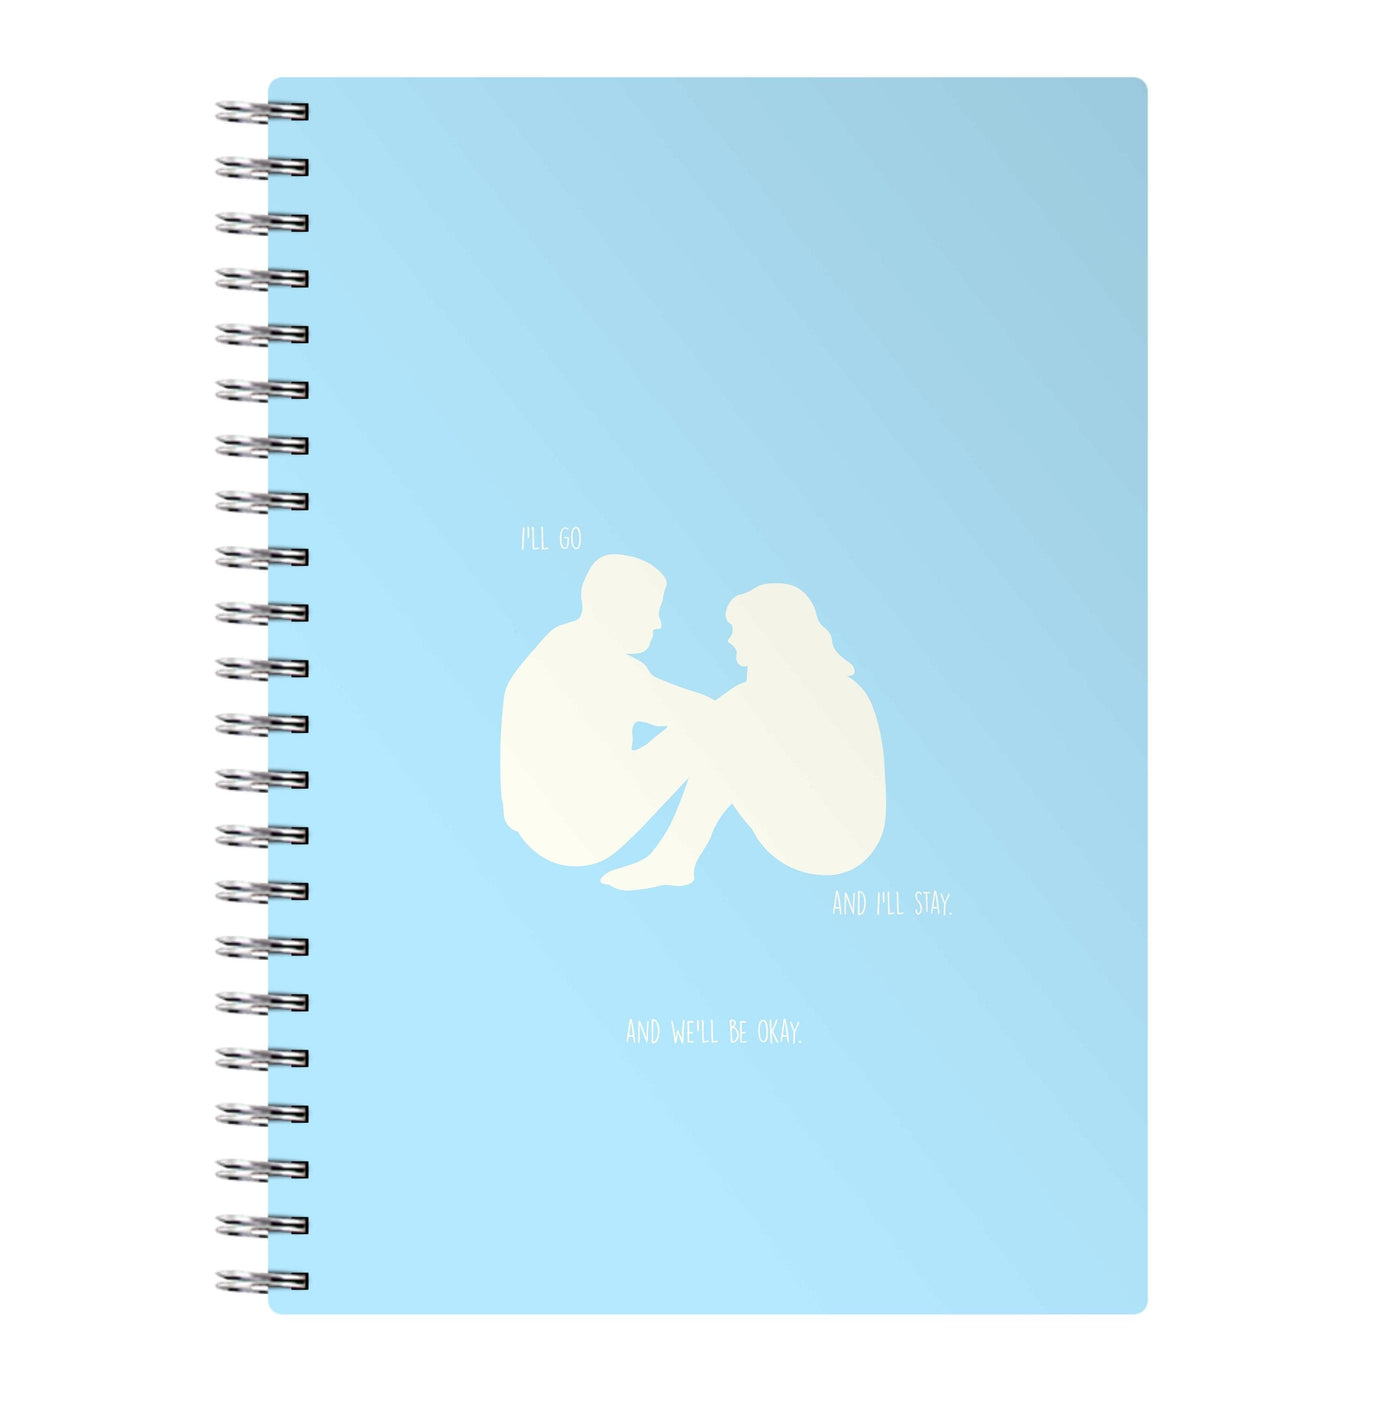 You Go And I'll Stay - Normal People Notebook